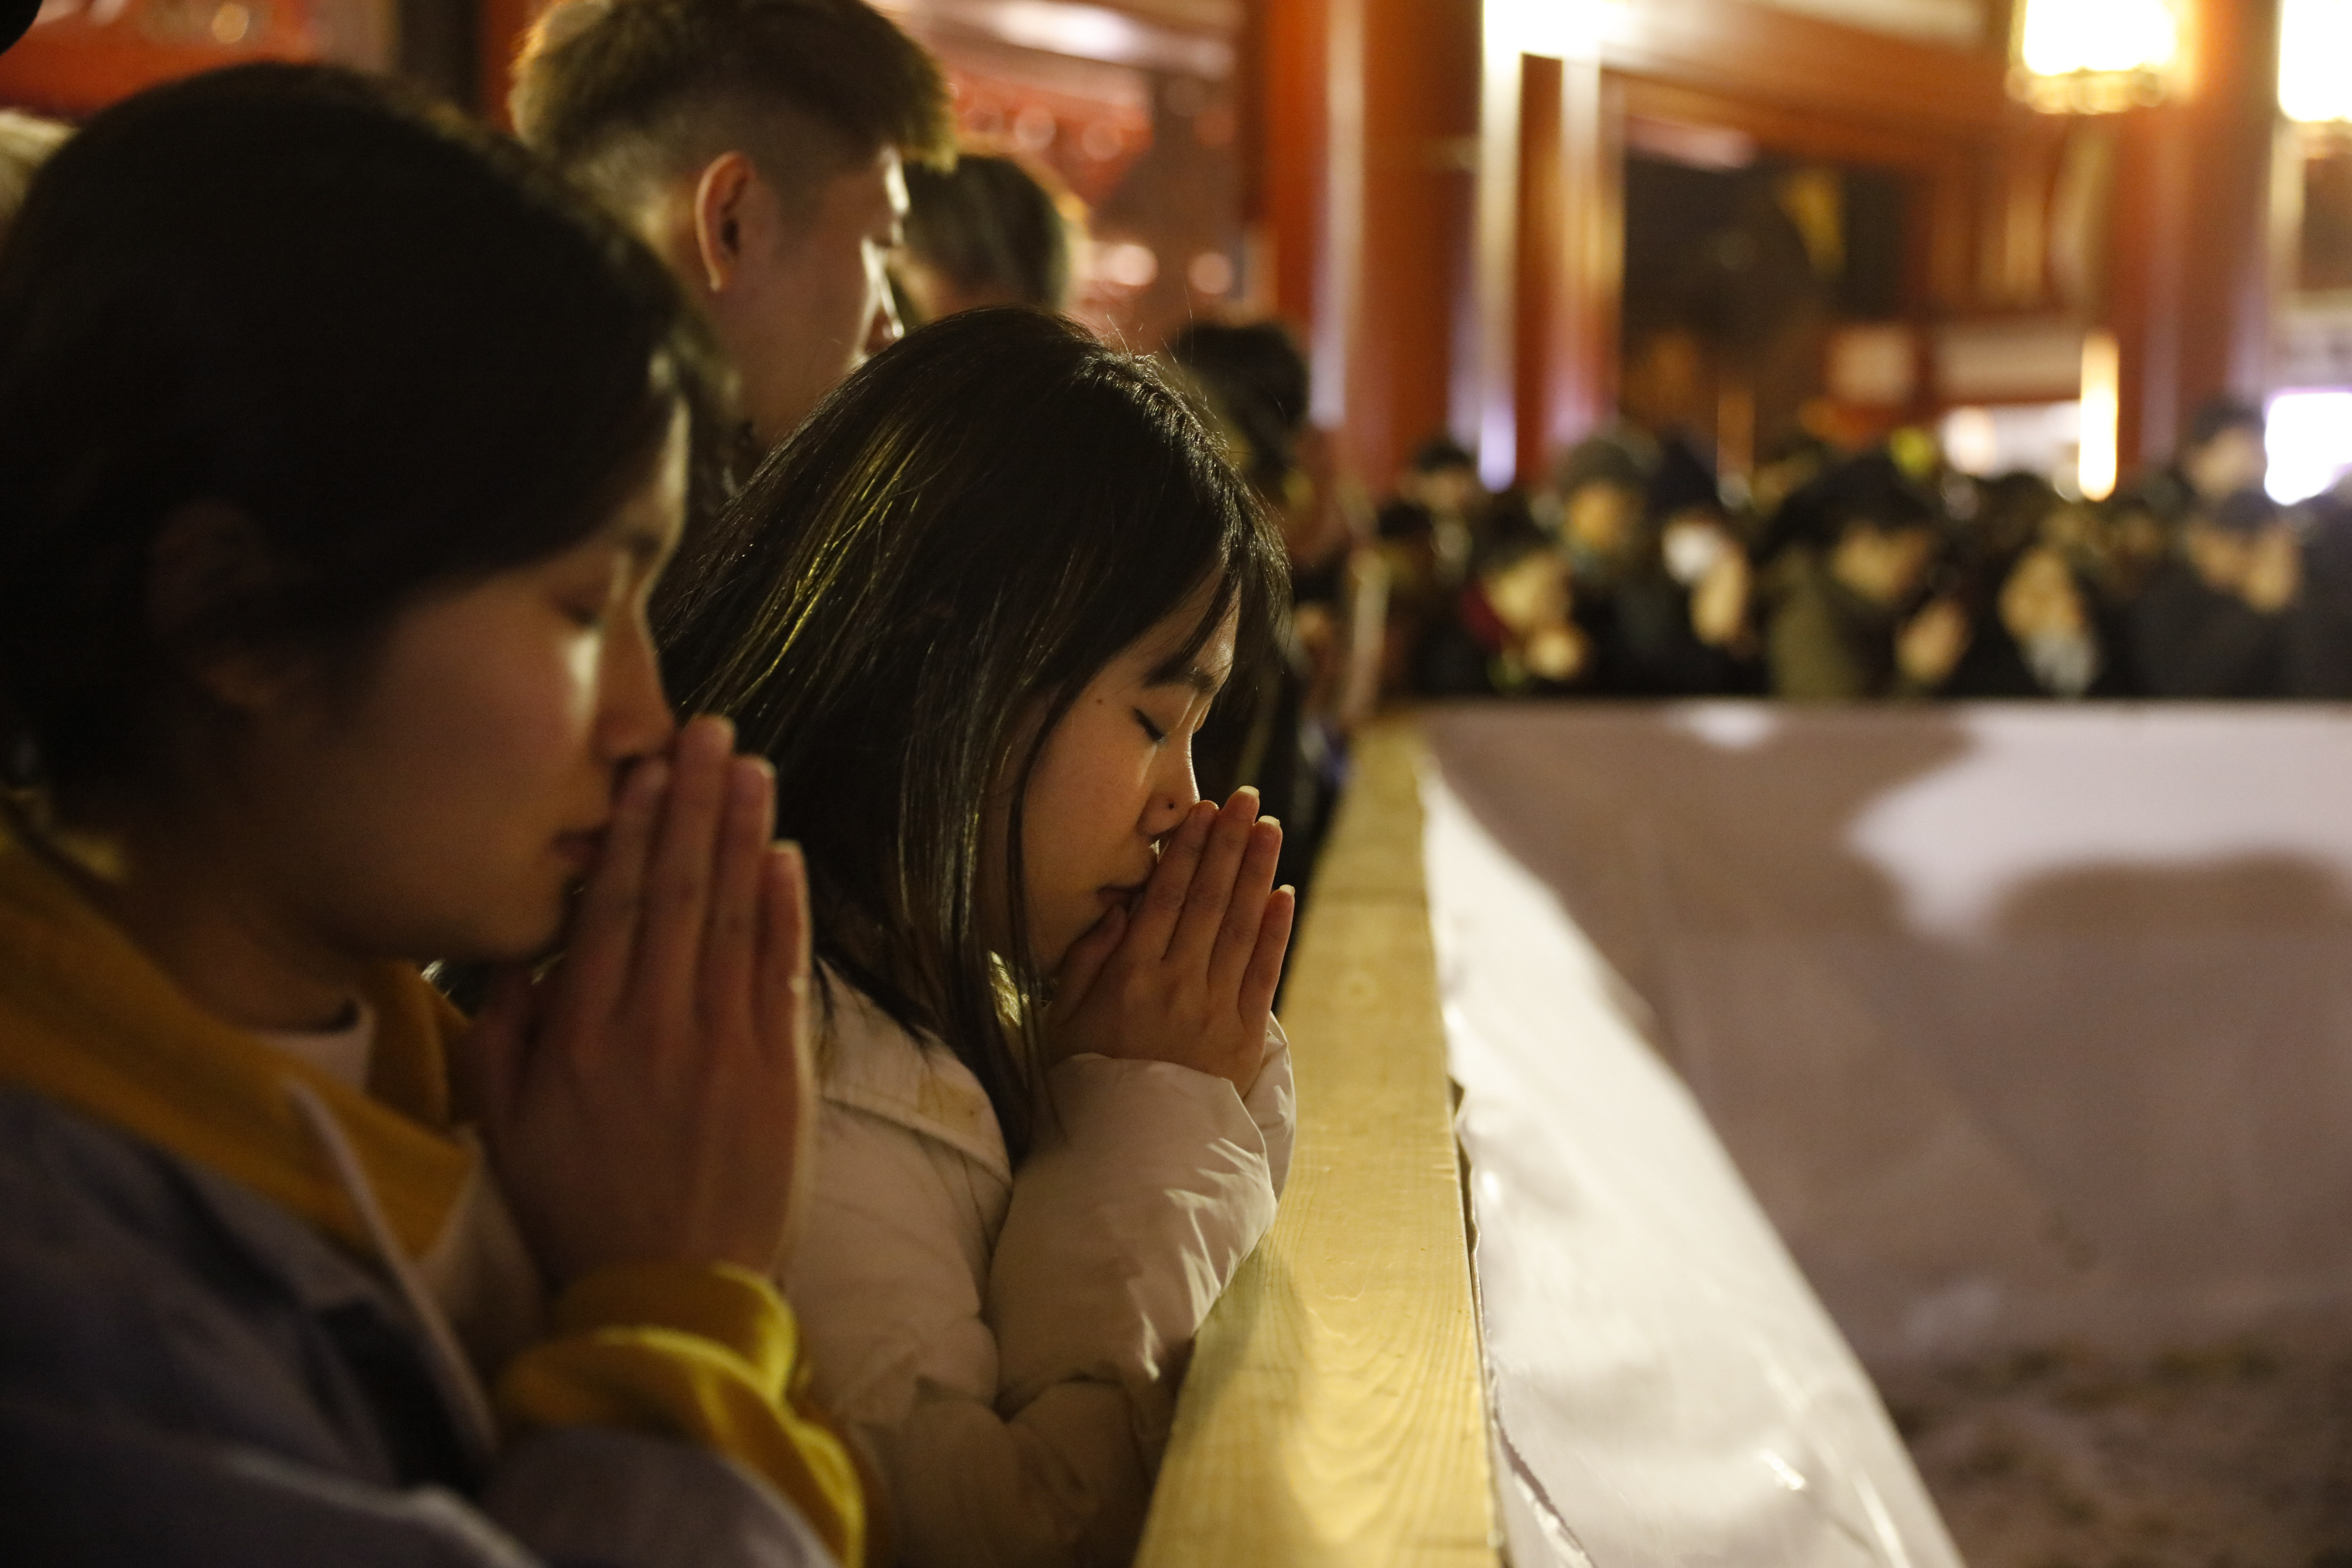 People pray at Sensoji temple as part of the New Year's celebration on January 1, 2020, in Tokyo